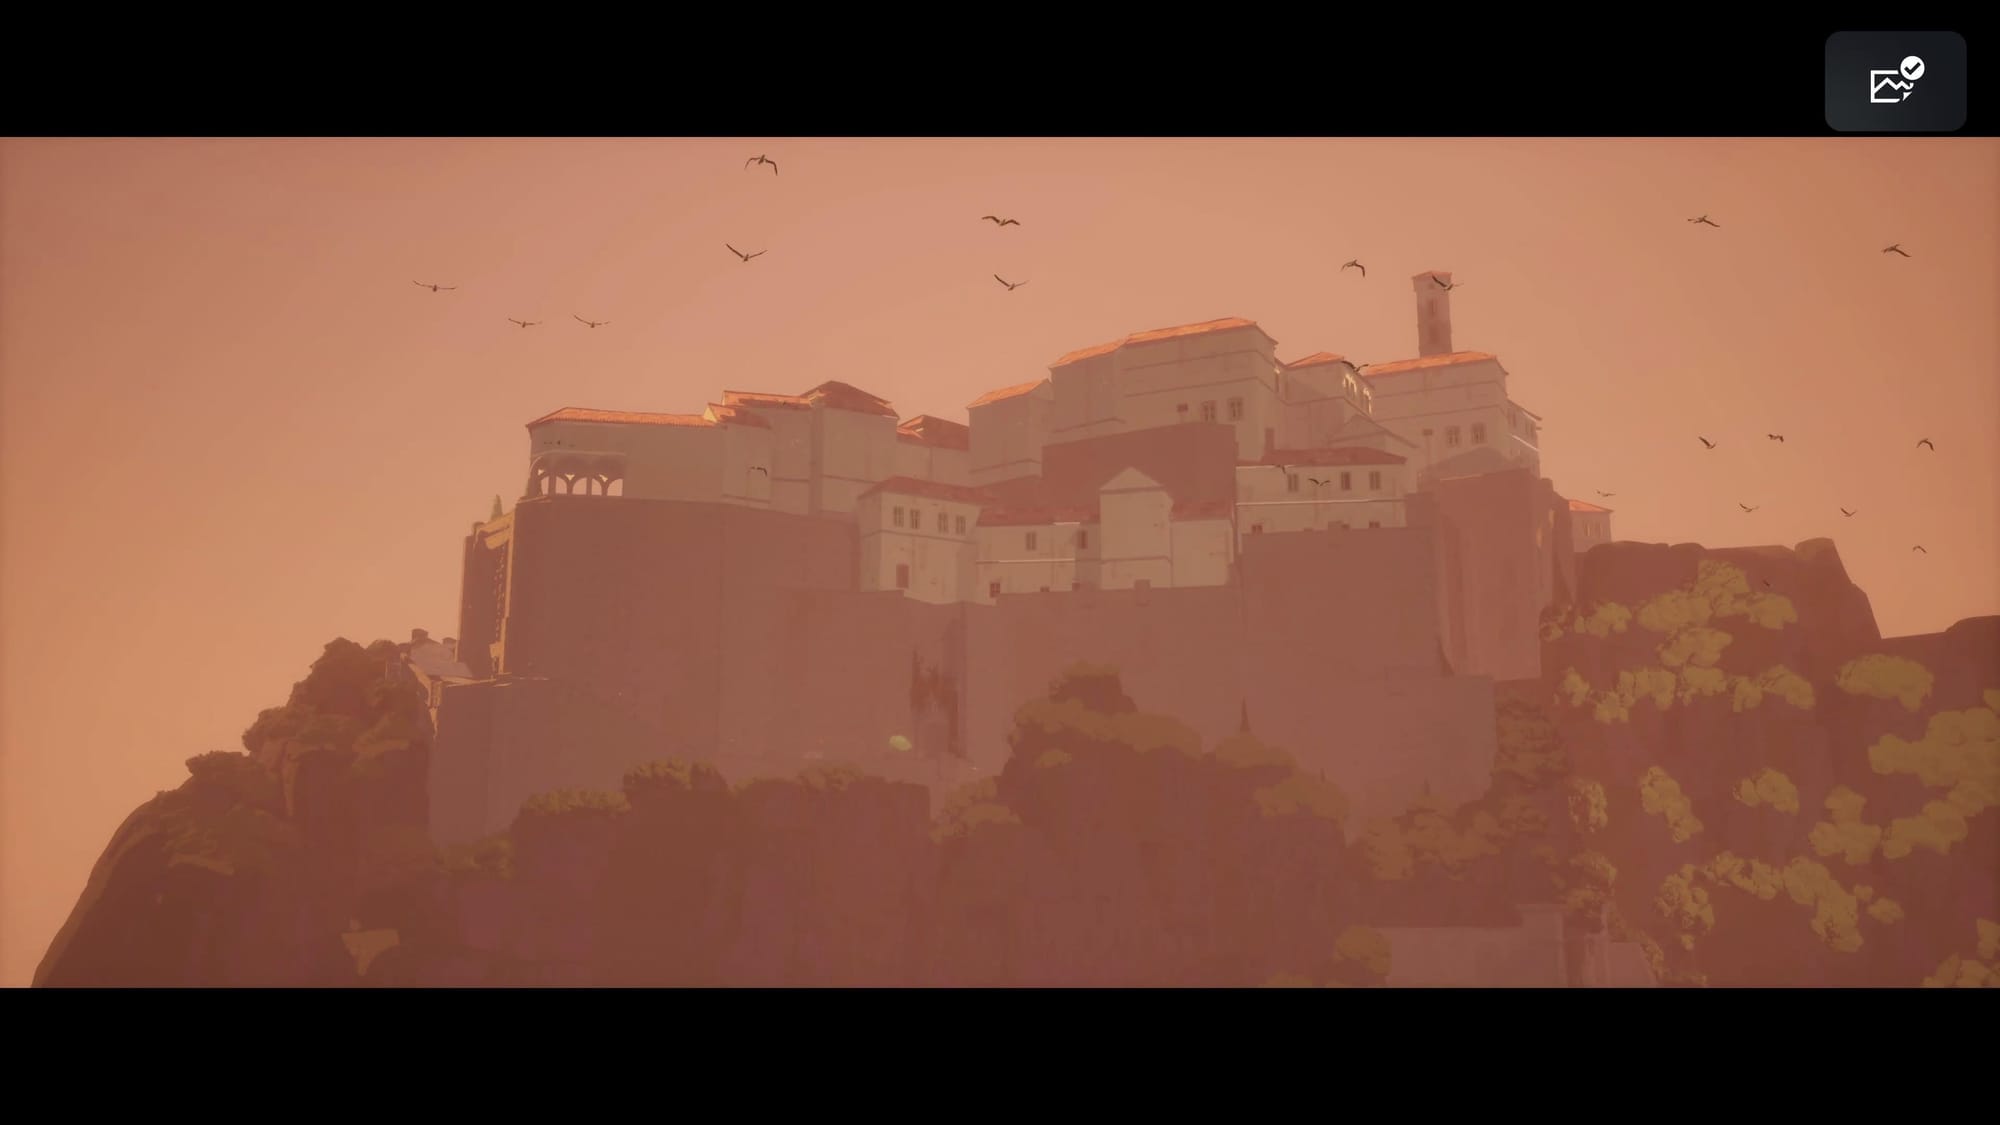 A screenshot showing a stone city on a high hill with high walls and birds flying around.